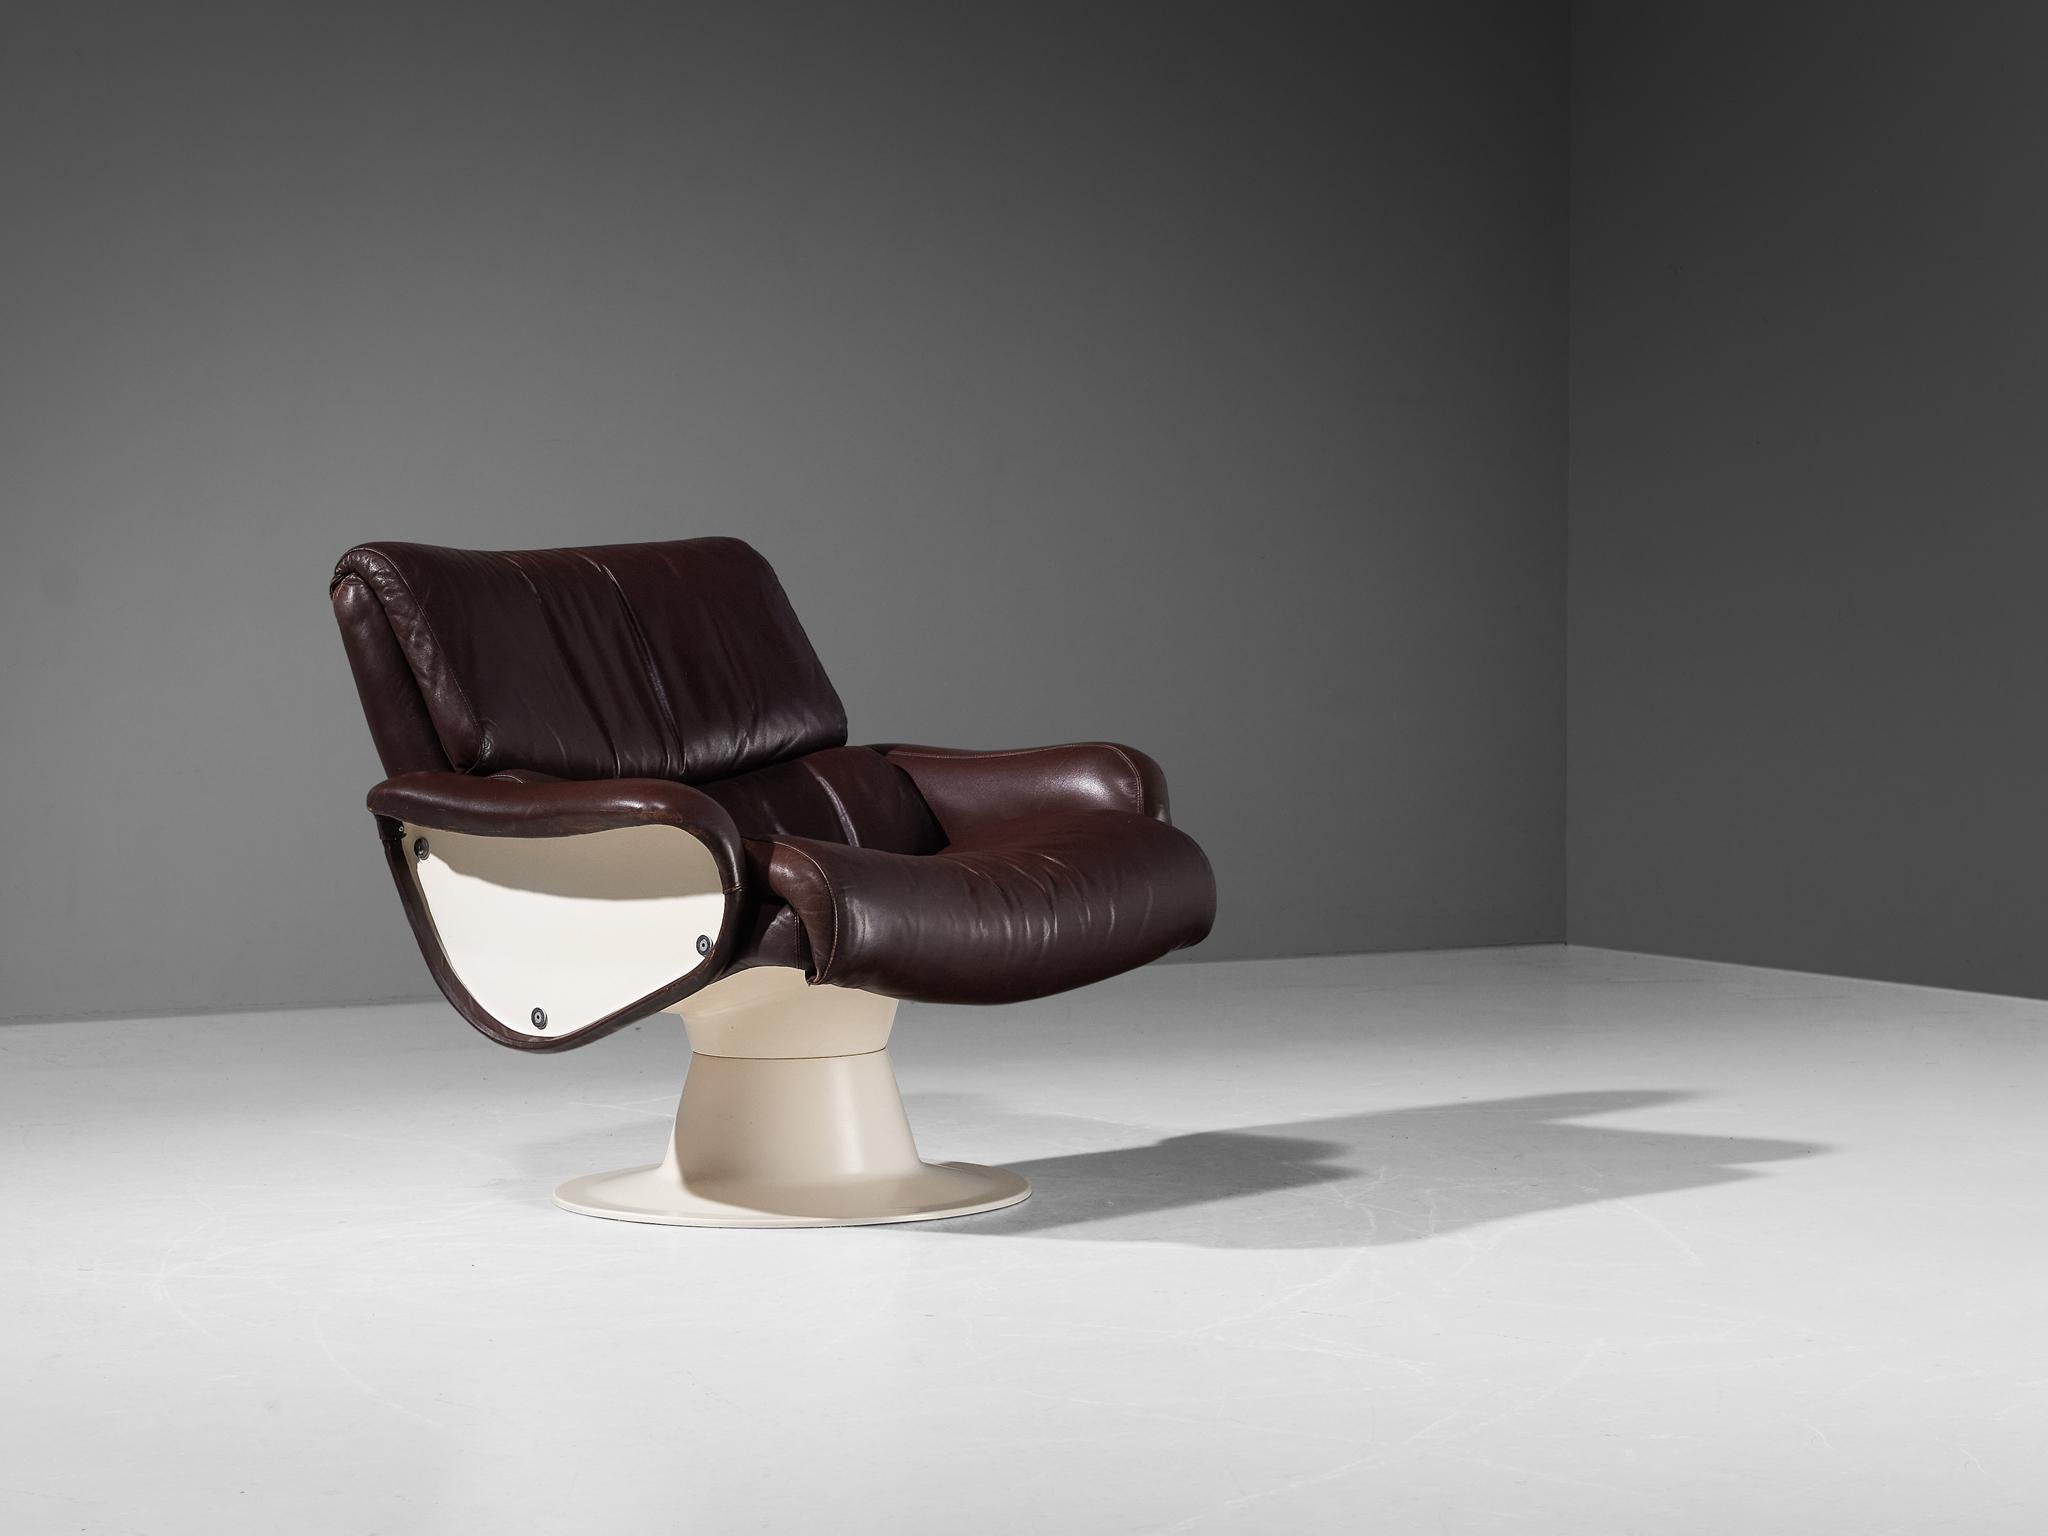 Yrjö Kukkapuro for Haimi, 'Saturnus' lounge chair, leather, fiberglass, Finland, 1960s

Organic shaped lounge chair by Finnish designer Yrjö Kukkapuro. This chair consist of a moulded fiberglass frame and seat with thick dark brown leather cushions.